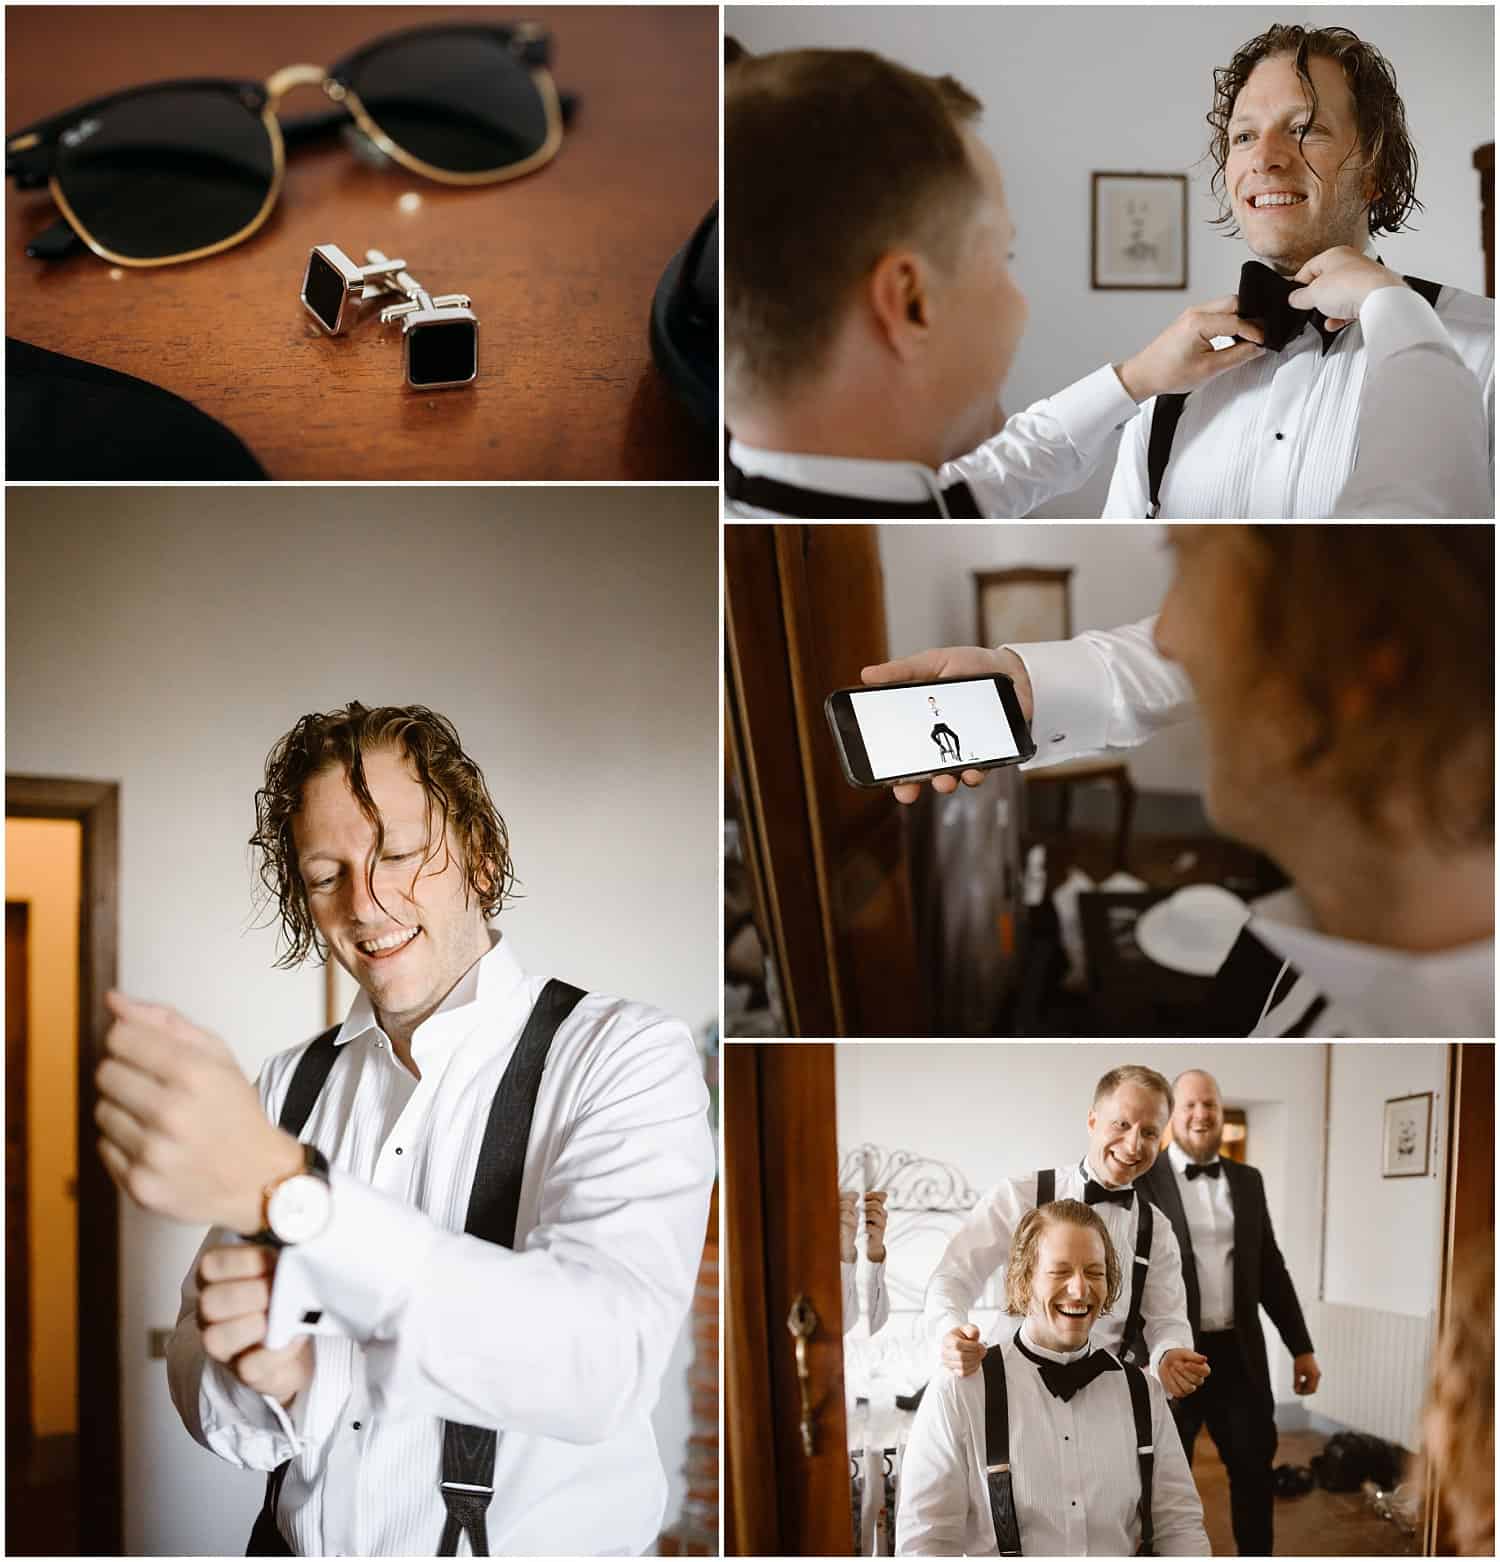 Groom having fun with his friends while he gets ready for his wedding in Tuscany